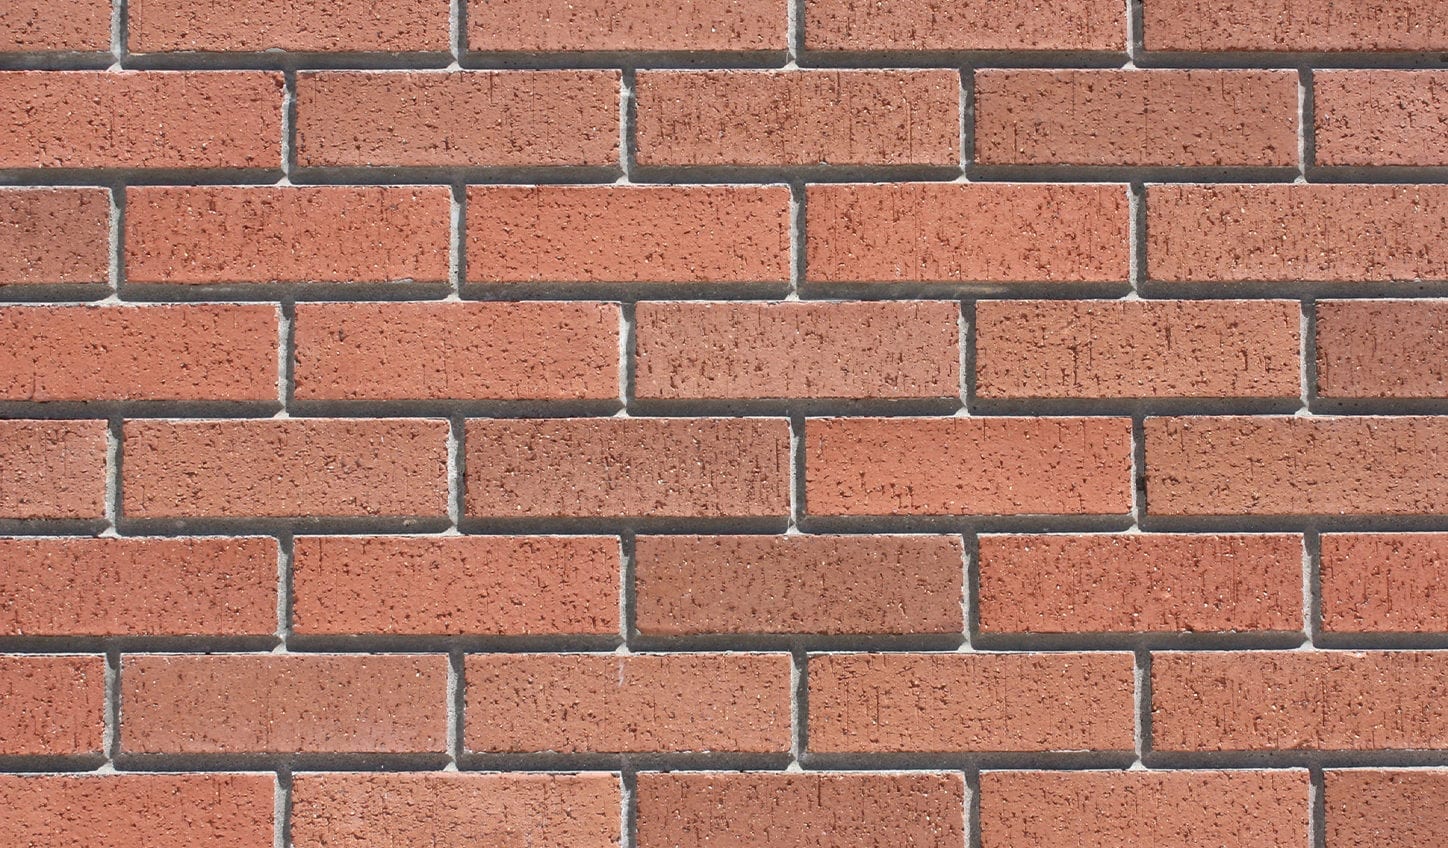 Thin Brick used on the USALSA buidling